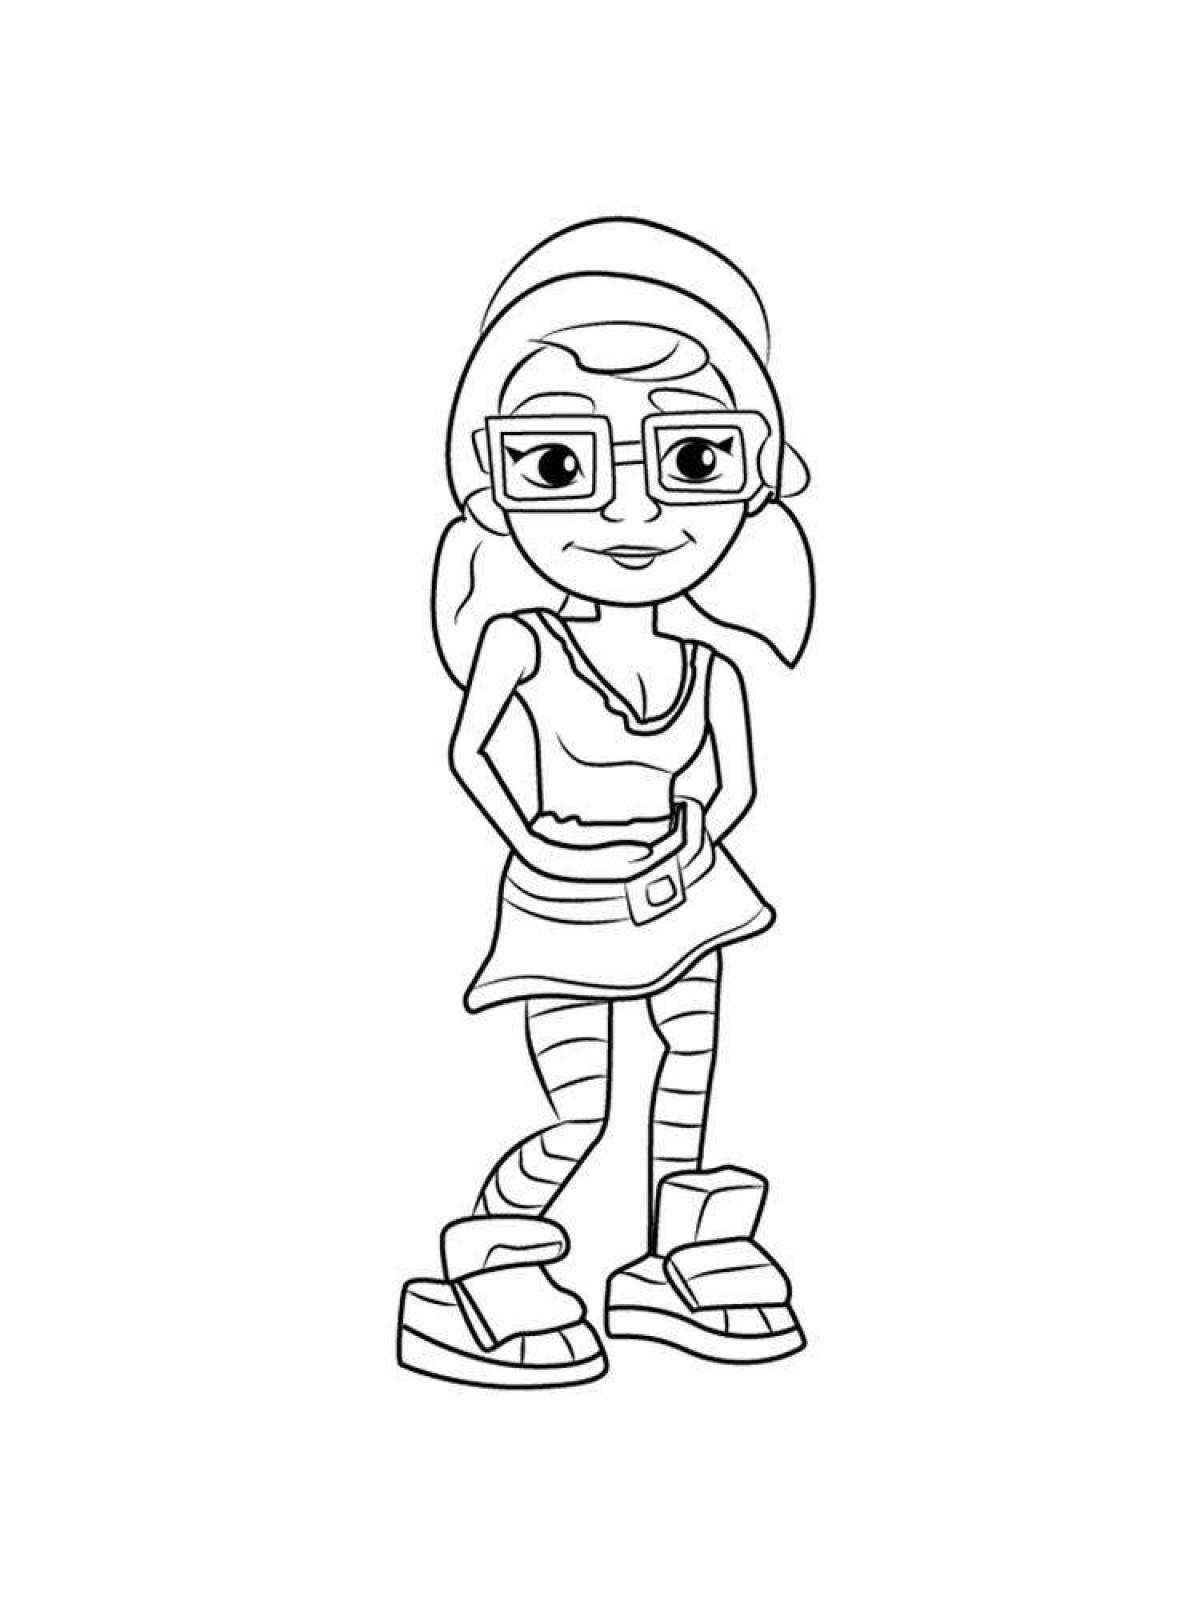 Subway surfers coloring page